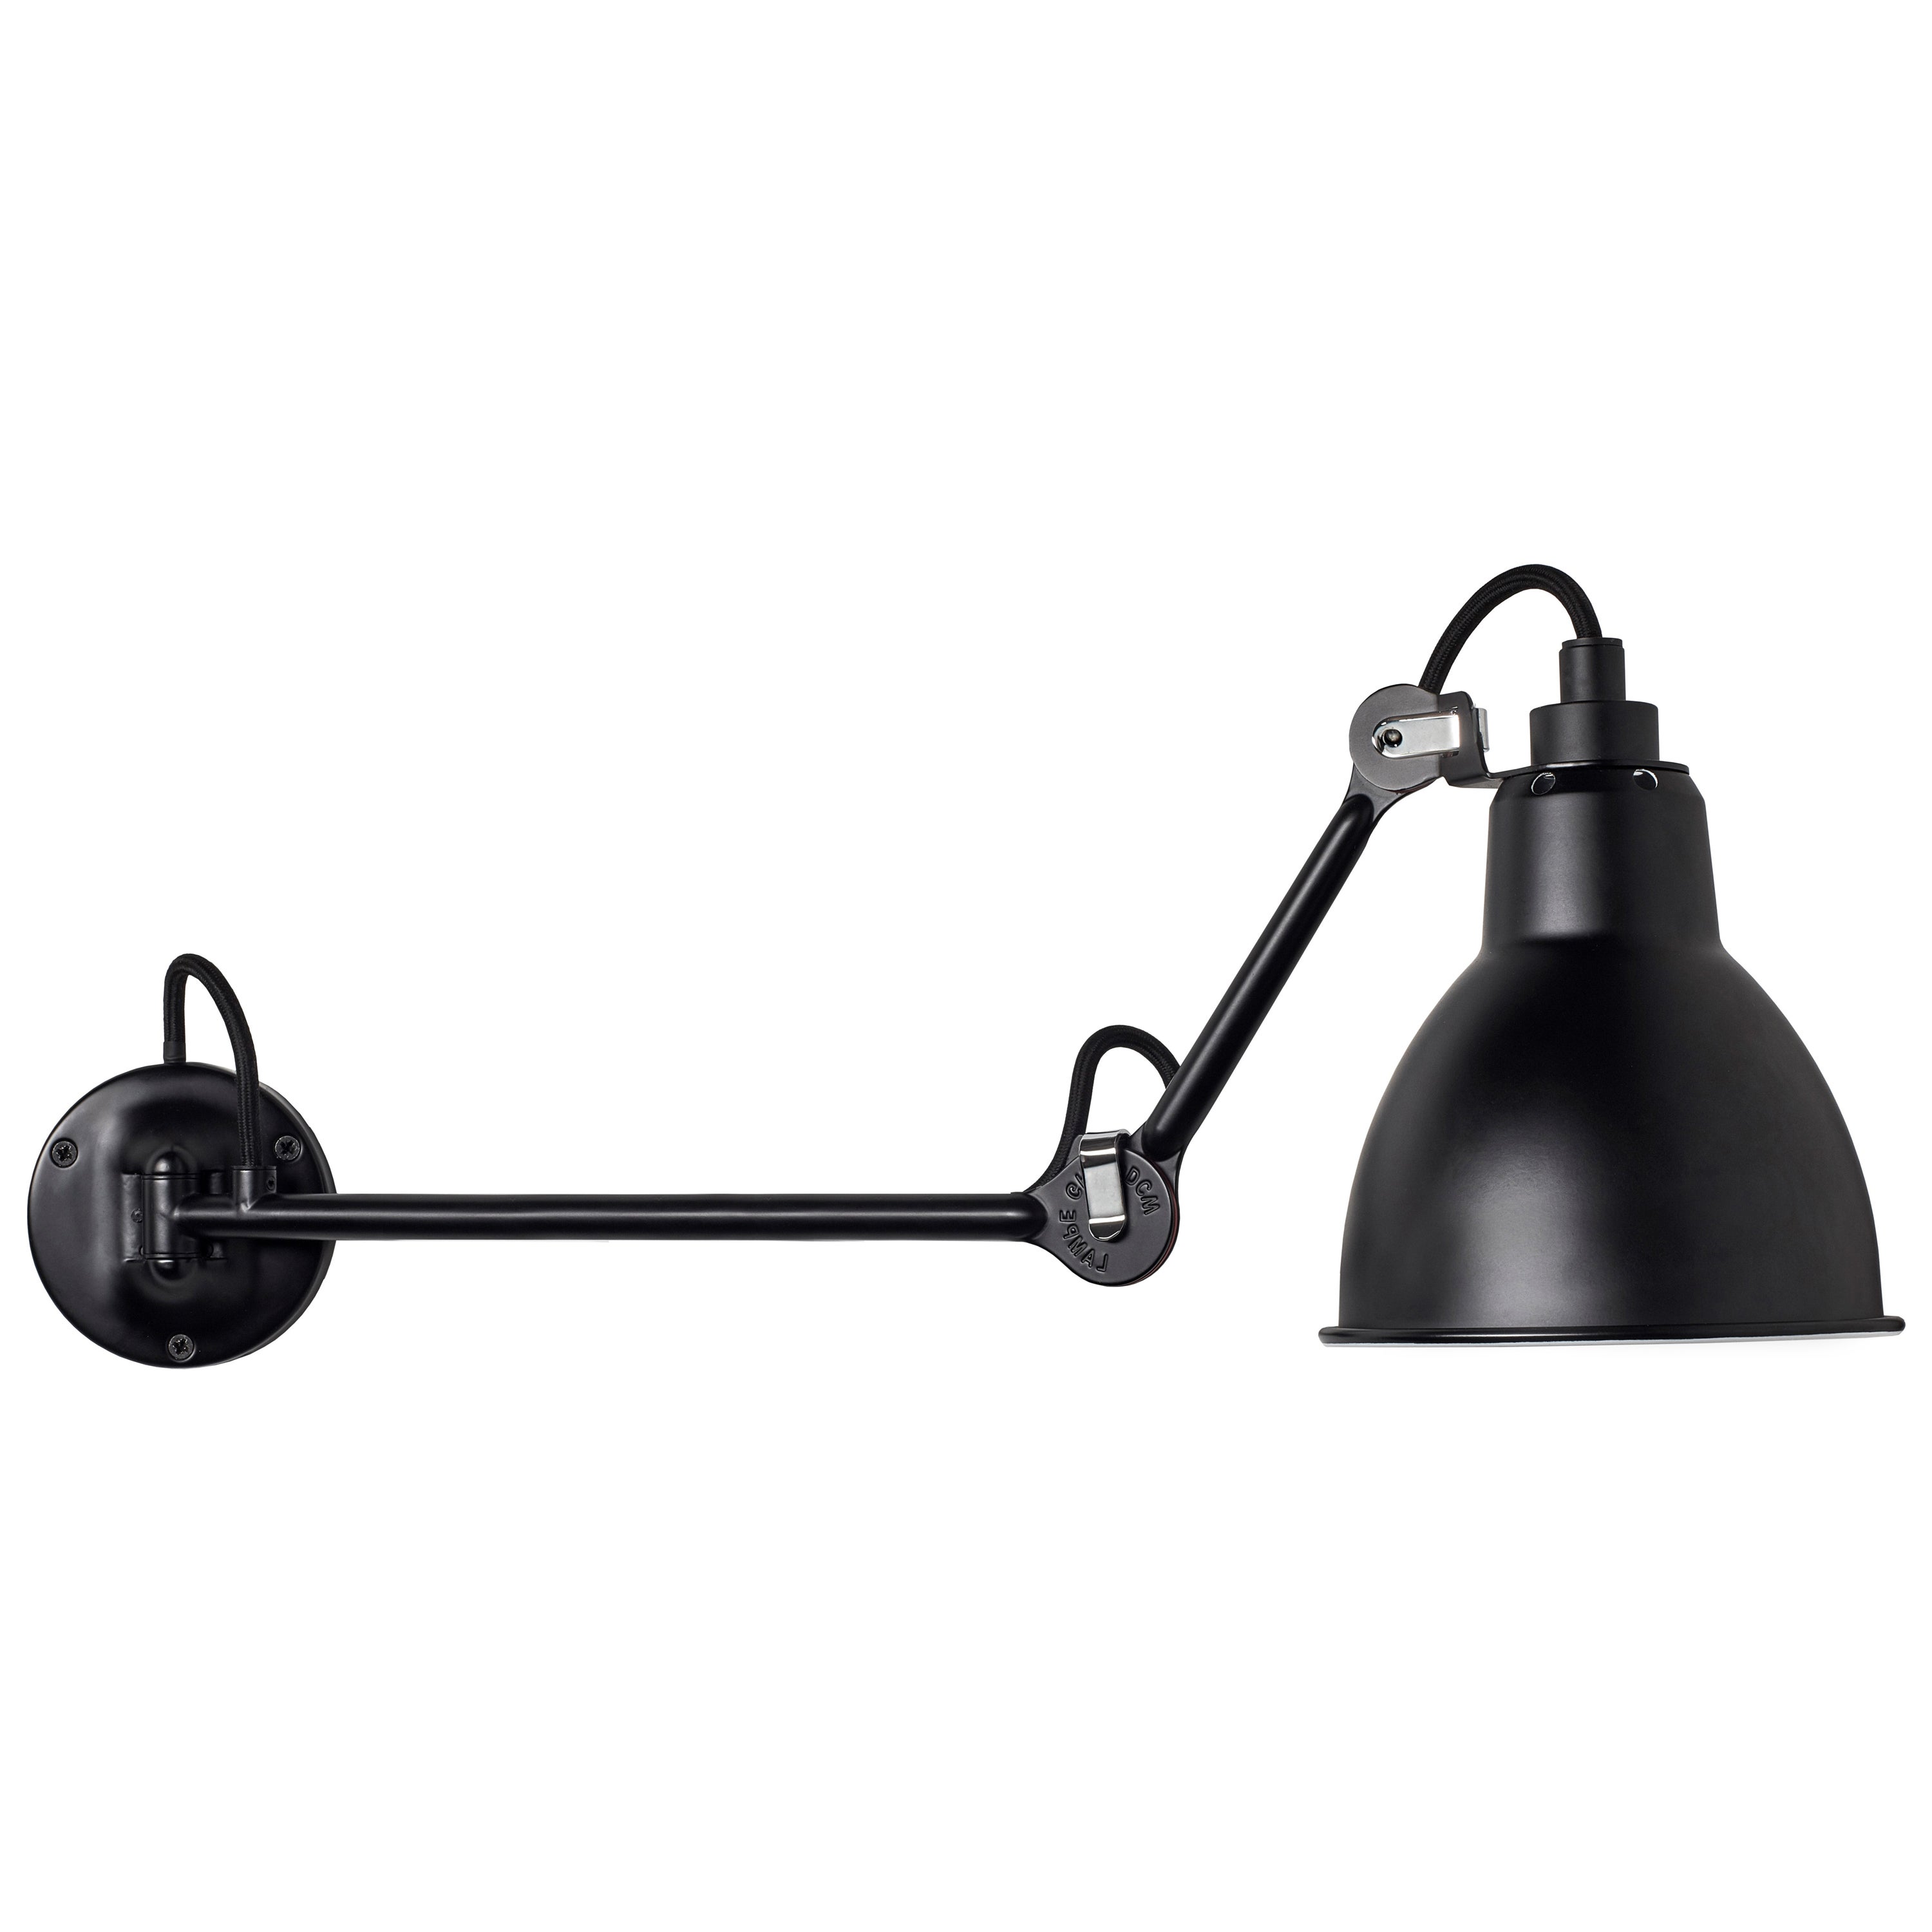 DCW Editions La Lampe Gras N°204 L40 Wall Lamp in Black Steel Arm & Black Shade For Sale